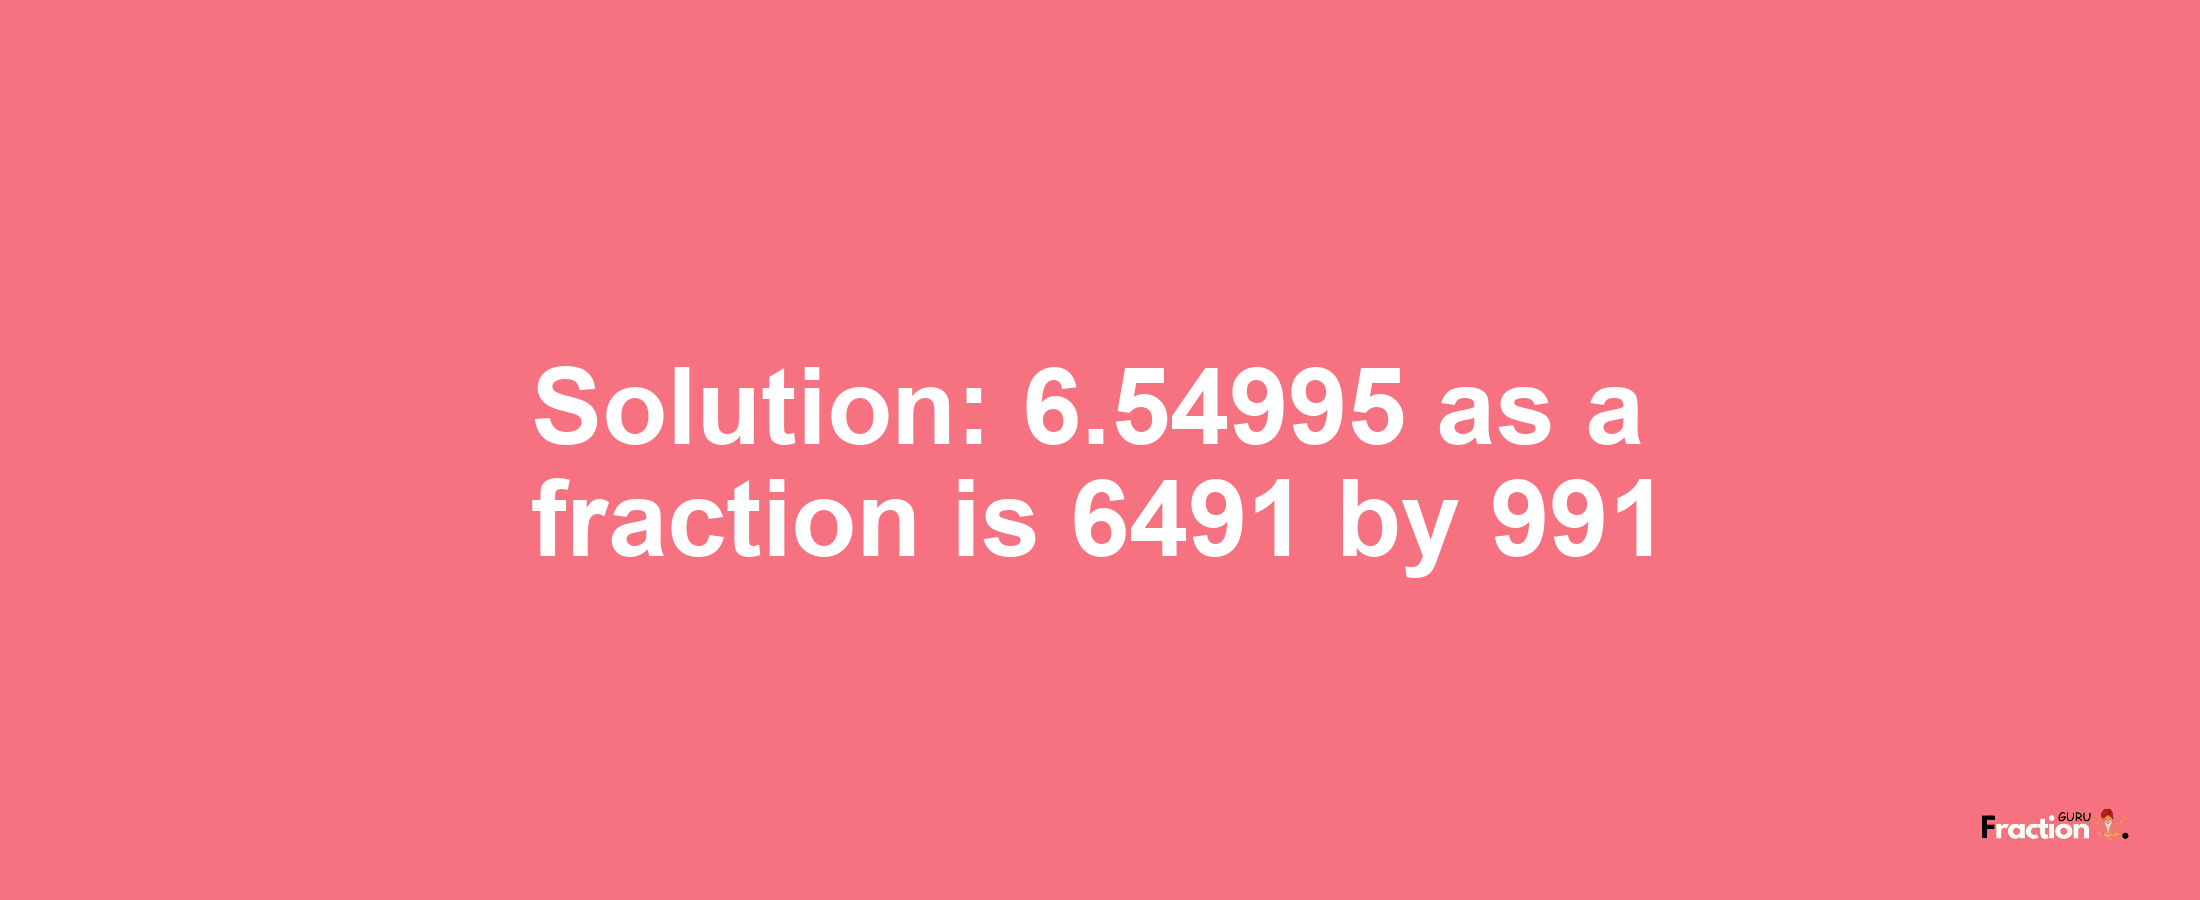 Solution:6.54995 as a fraction is 6491/991